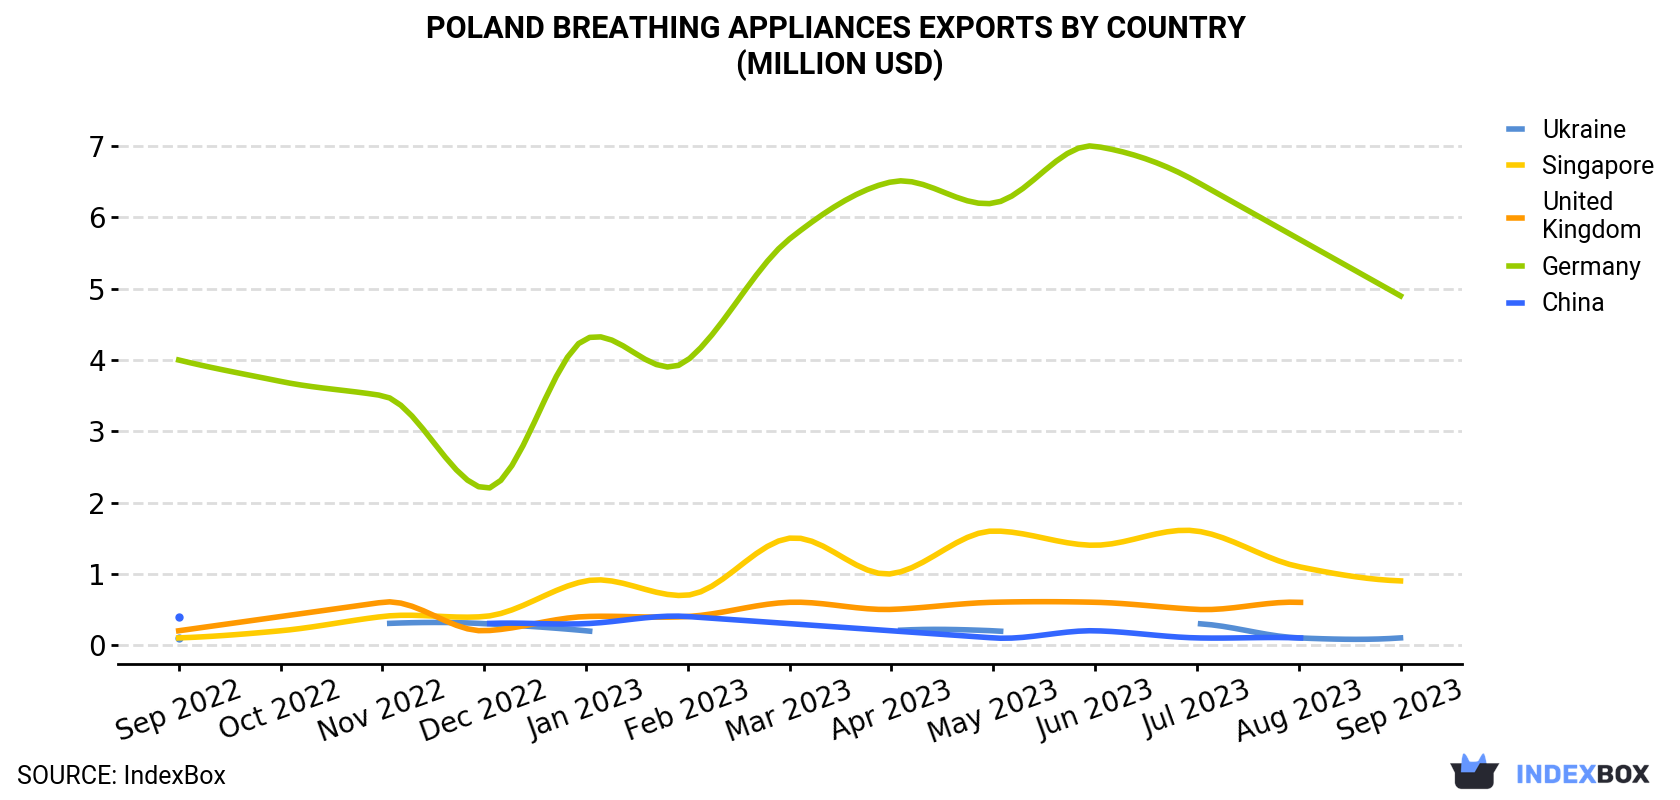 Poland Breathing Appliances Exports By Country (Million USD)